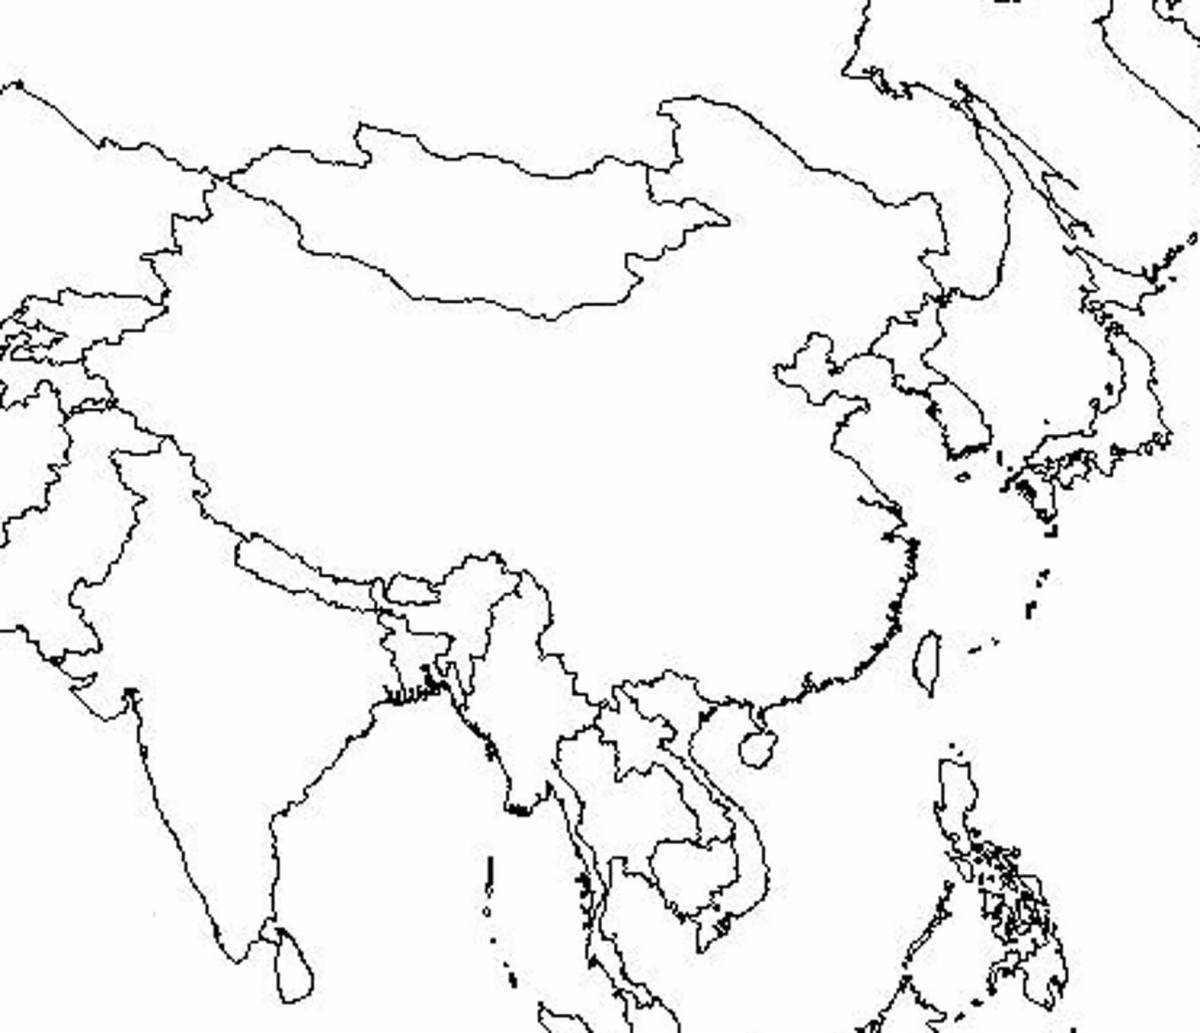 Bright eurasia coloring page